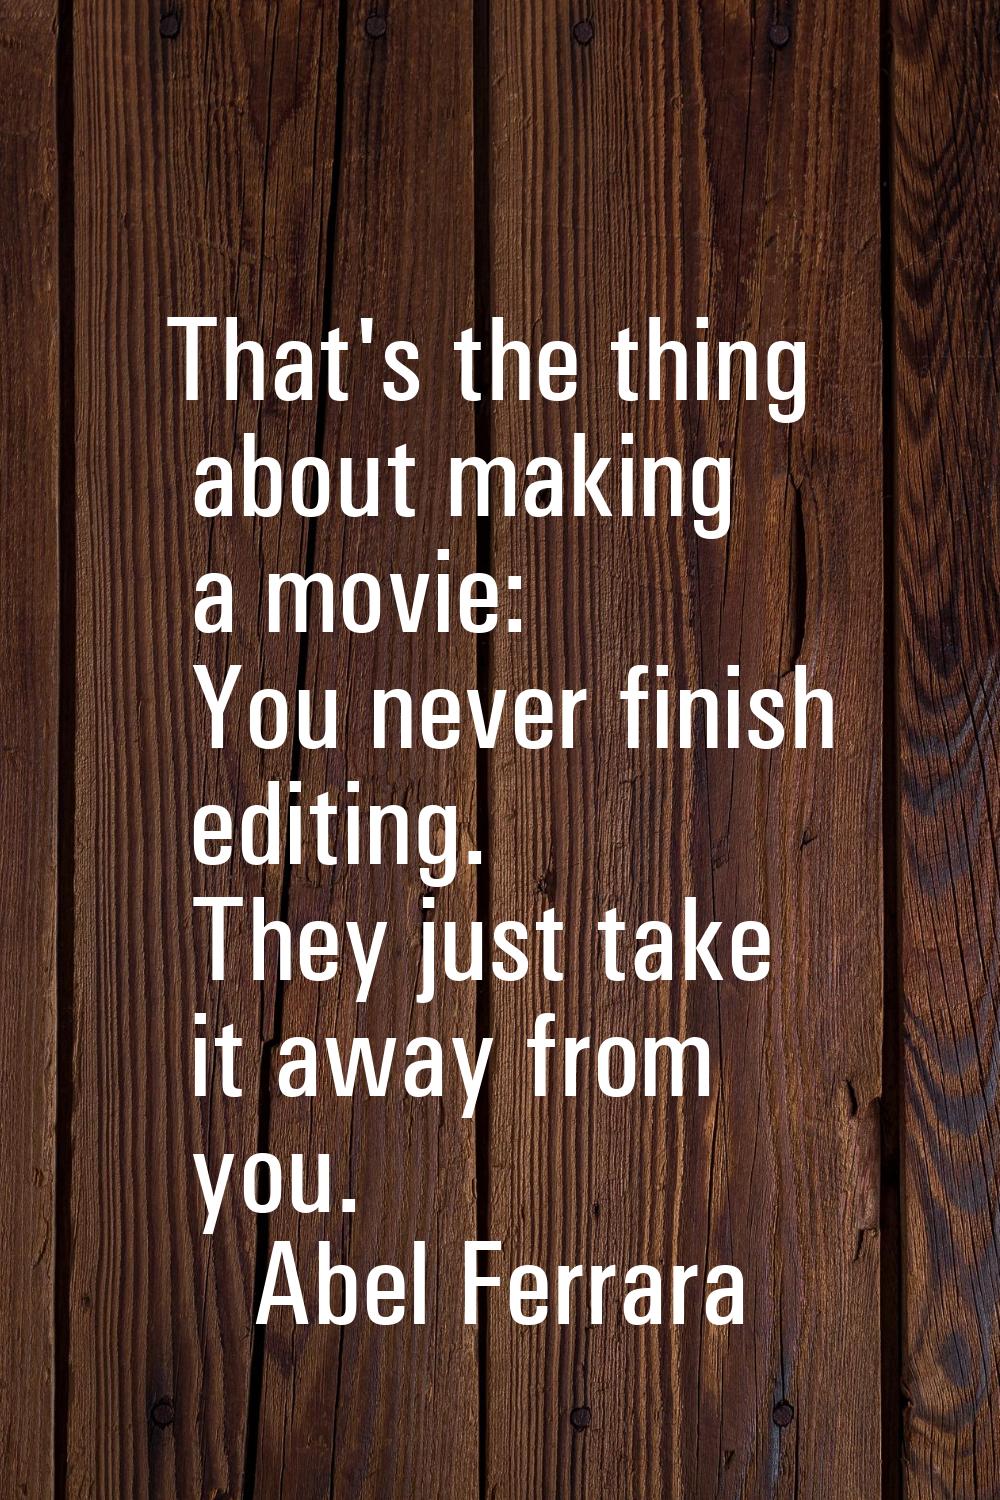 That's the thing about making a movie: You never finish editing. They just take it away from you.